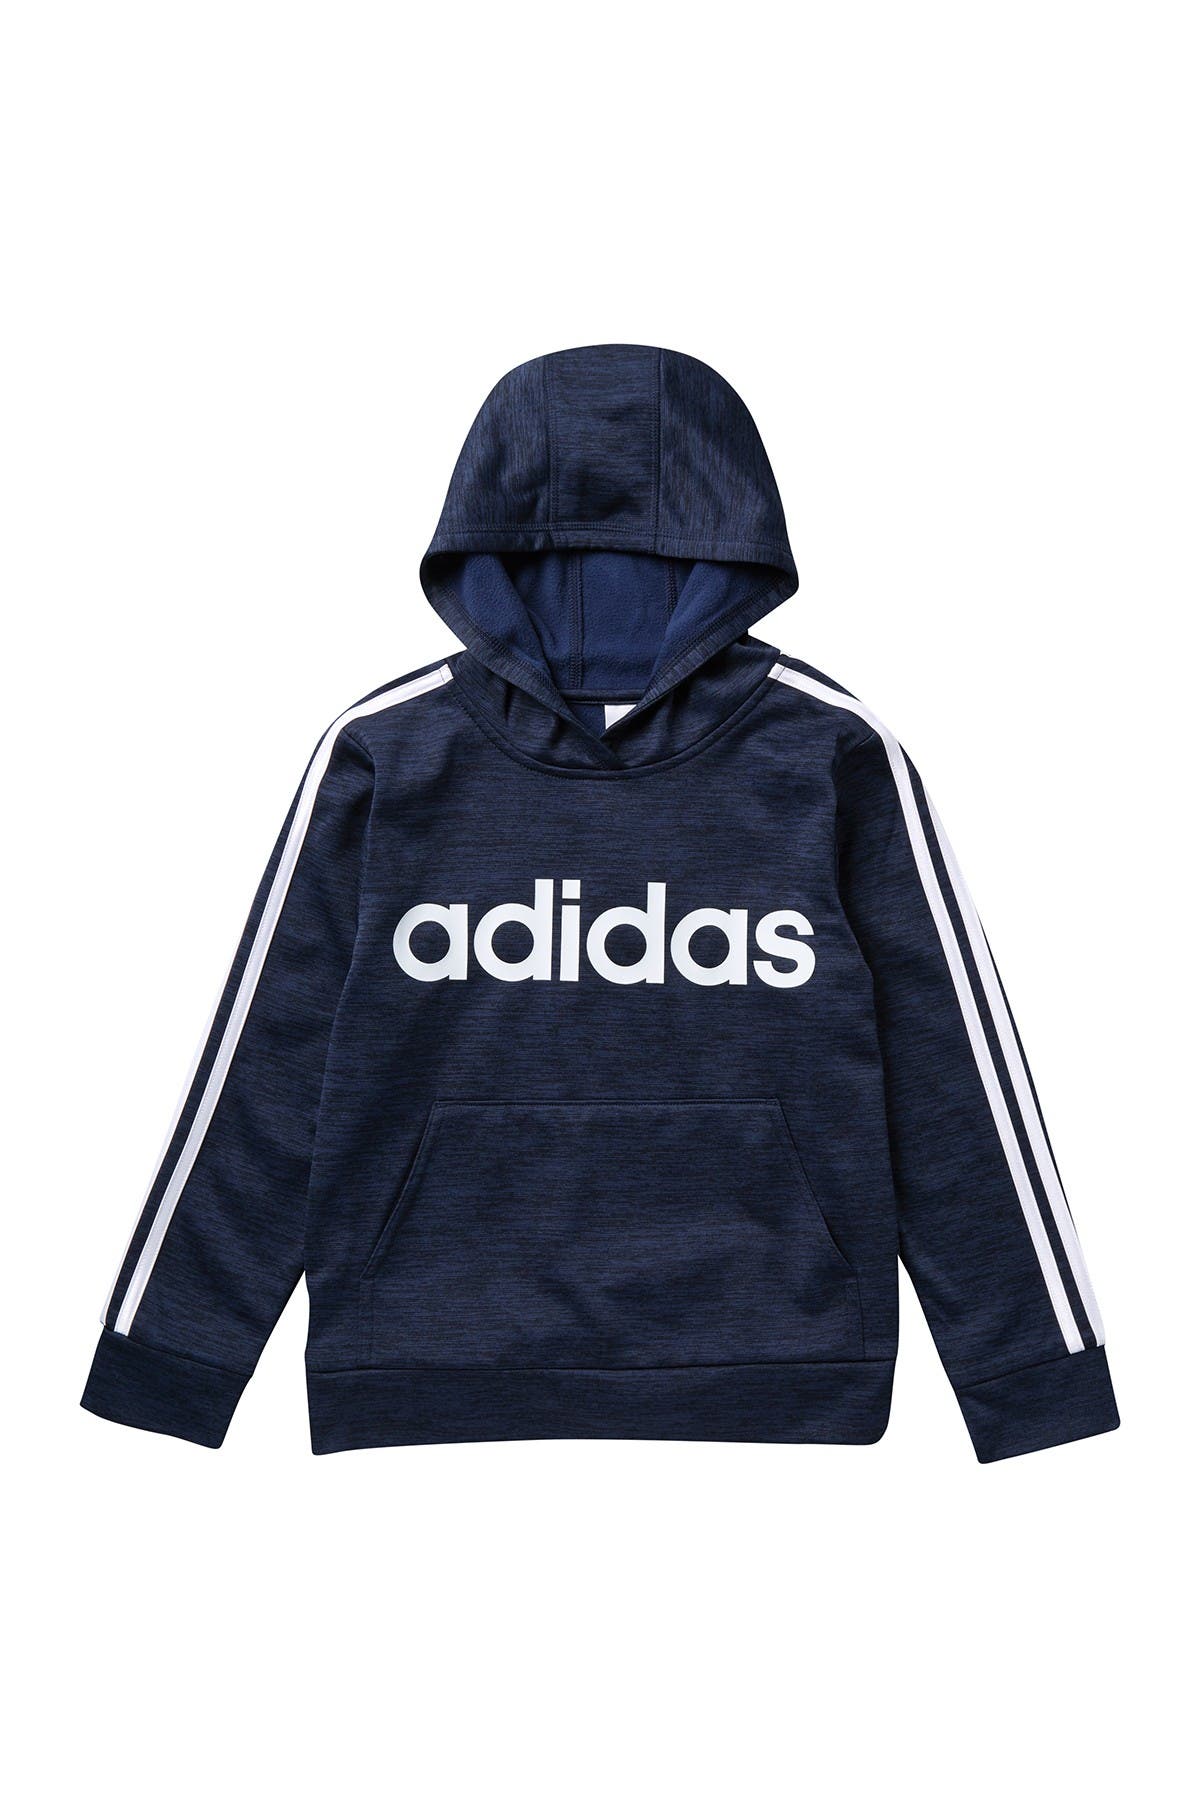 adidas pullover sweater